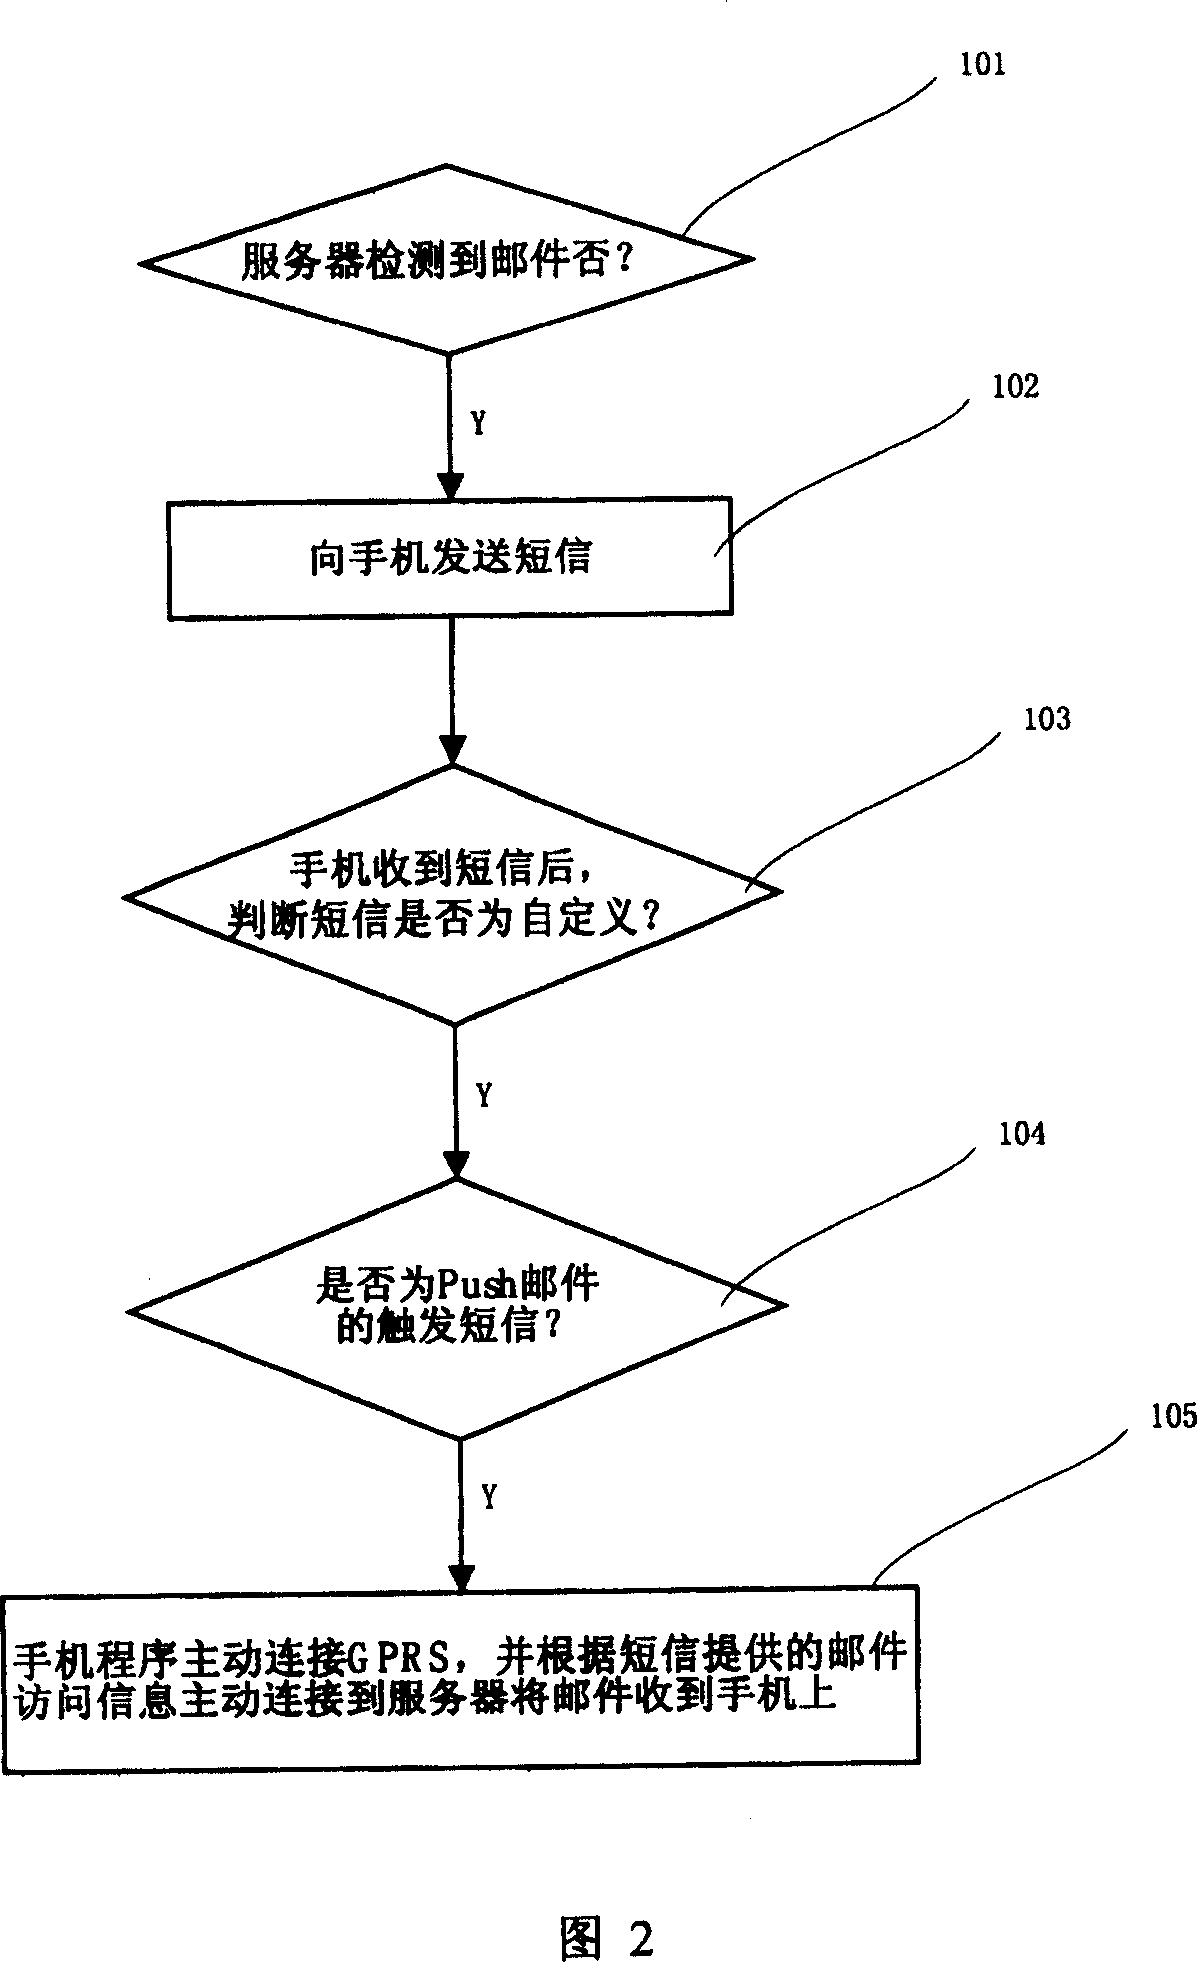 Method for automatic delivering e-mail to customer terminal by short-message triggering GPRS